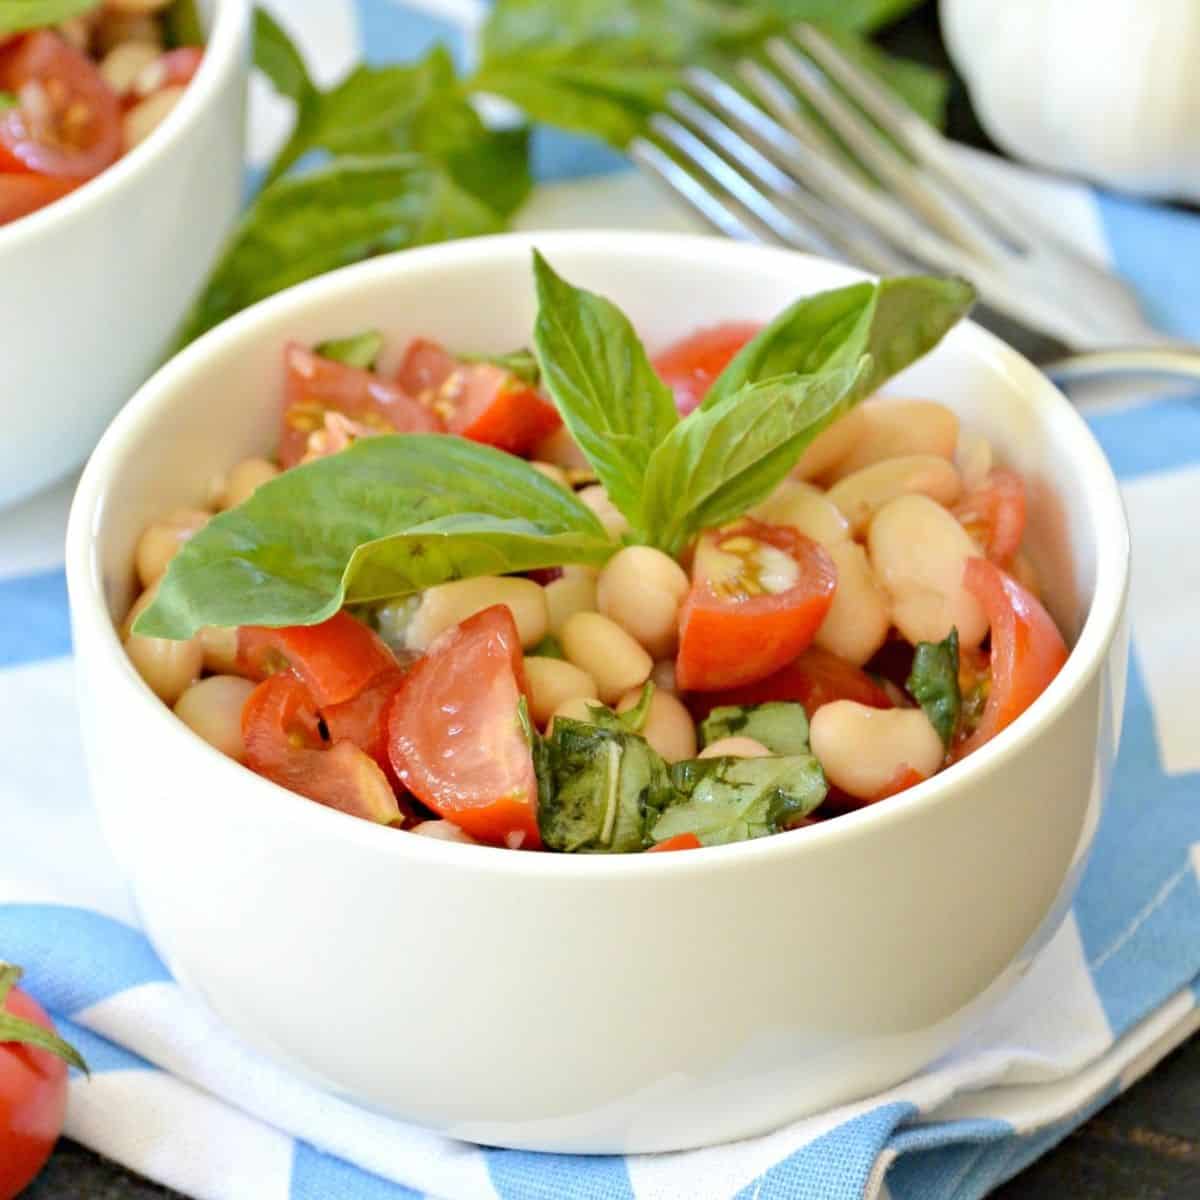 Bowl of bean and tomato salad garnished with sprig of fresh basil